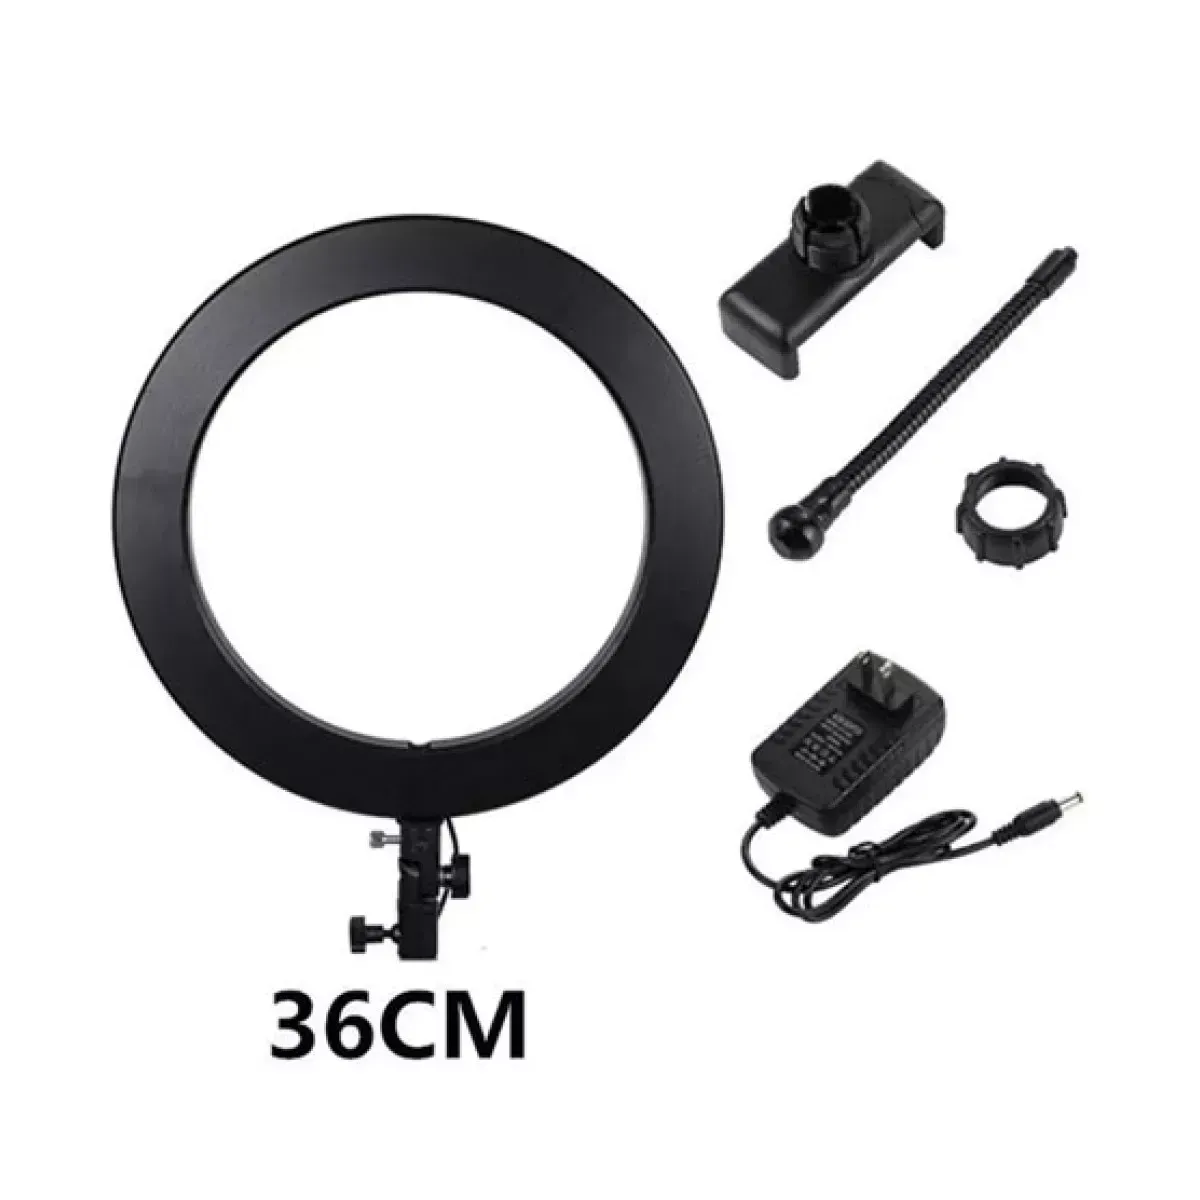 36cm Ring light (14 inches)